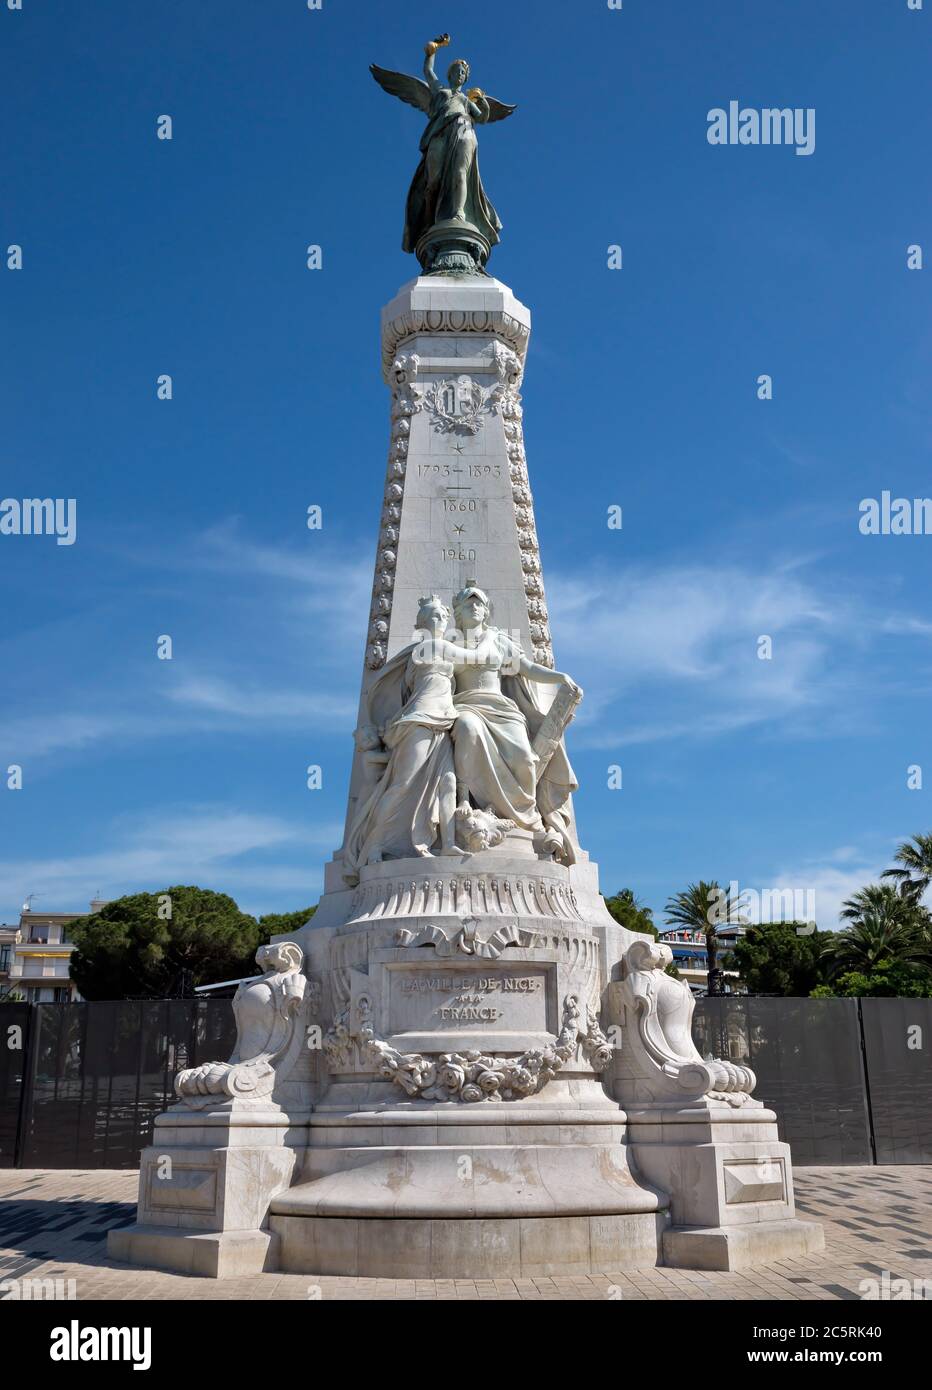 Monument du Centenaire, Promenade des Anglais, Nice, France. Andre-Joseph  Allar was inaugurated March 4, 1896 to Albert 1st Gardens. Architect is  Jule Stock Photo - Alamy